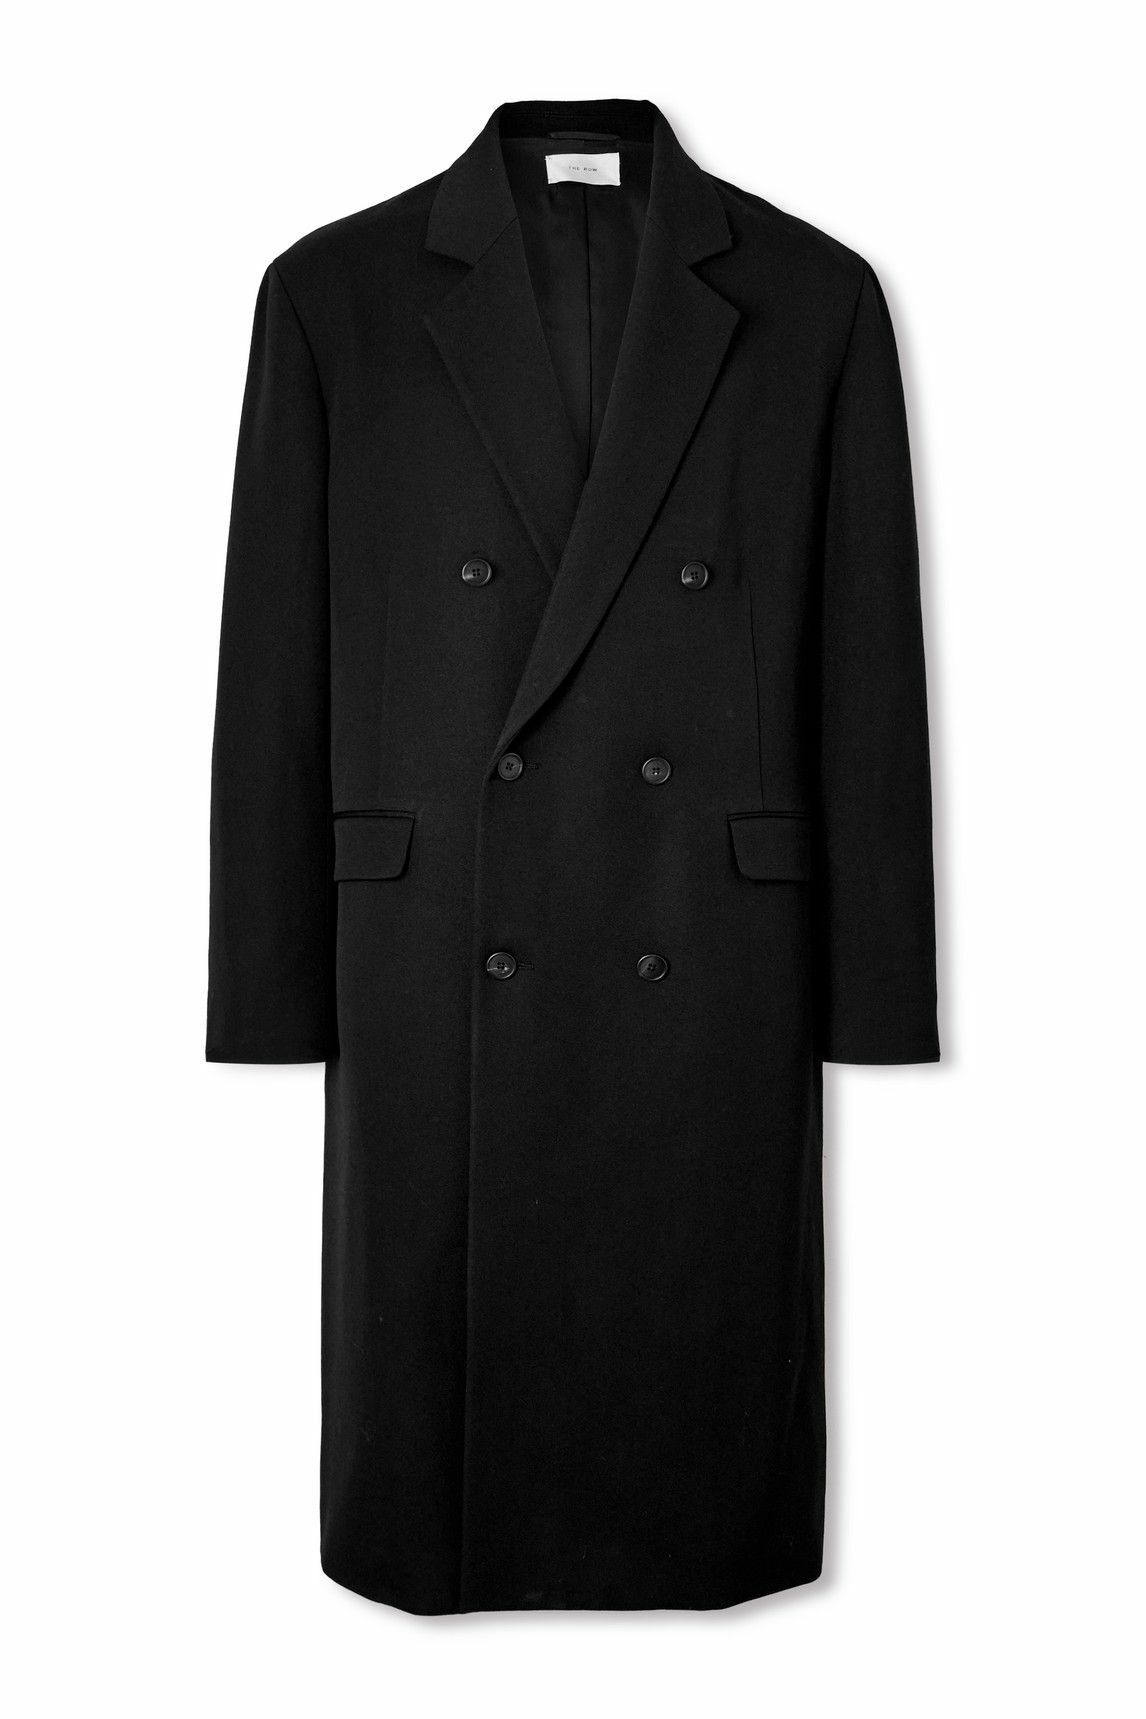 The Row - Anders Double-Breasted Wool Coat - Black The Row